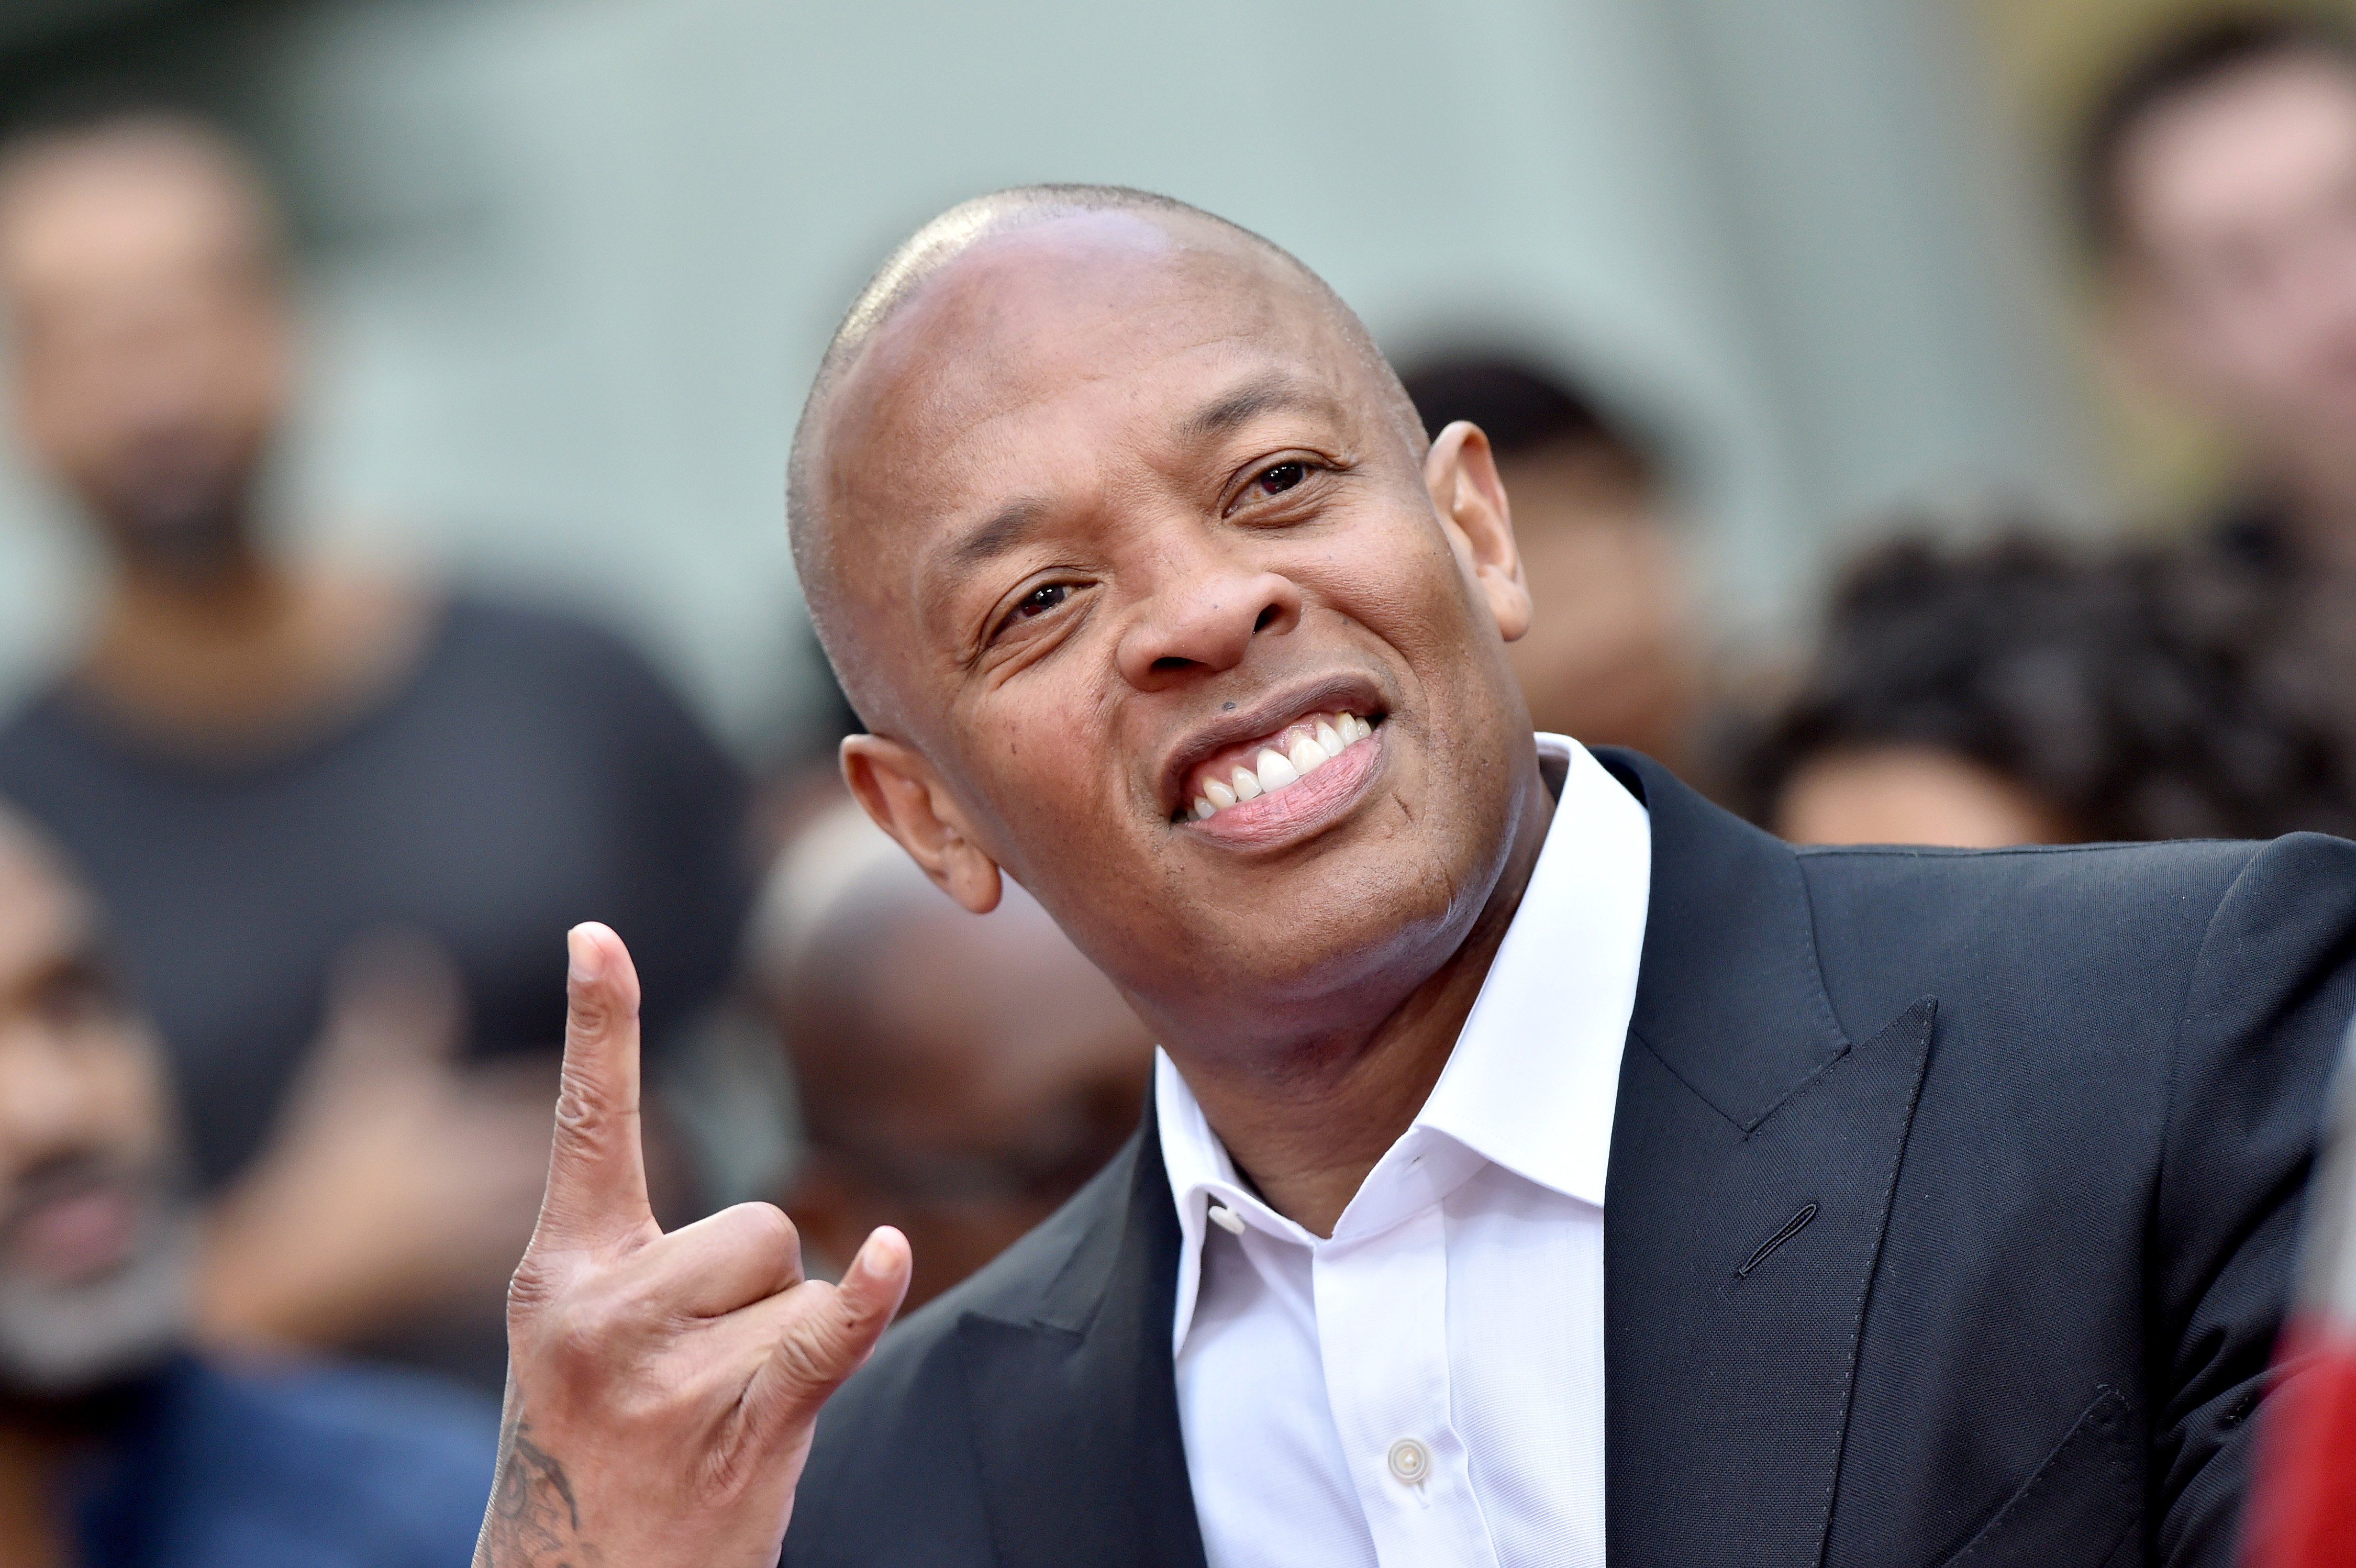  Dr. Dre at a red carpet event